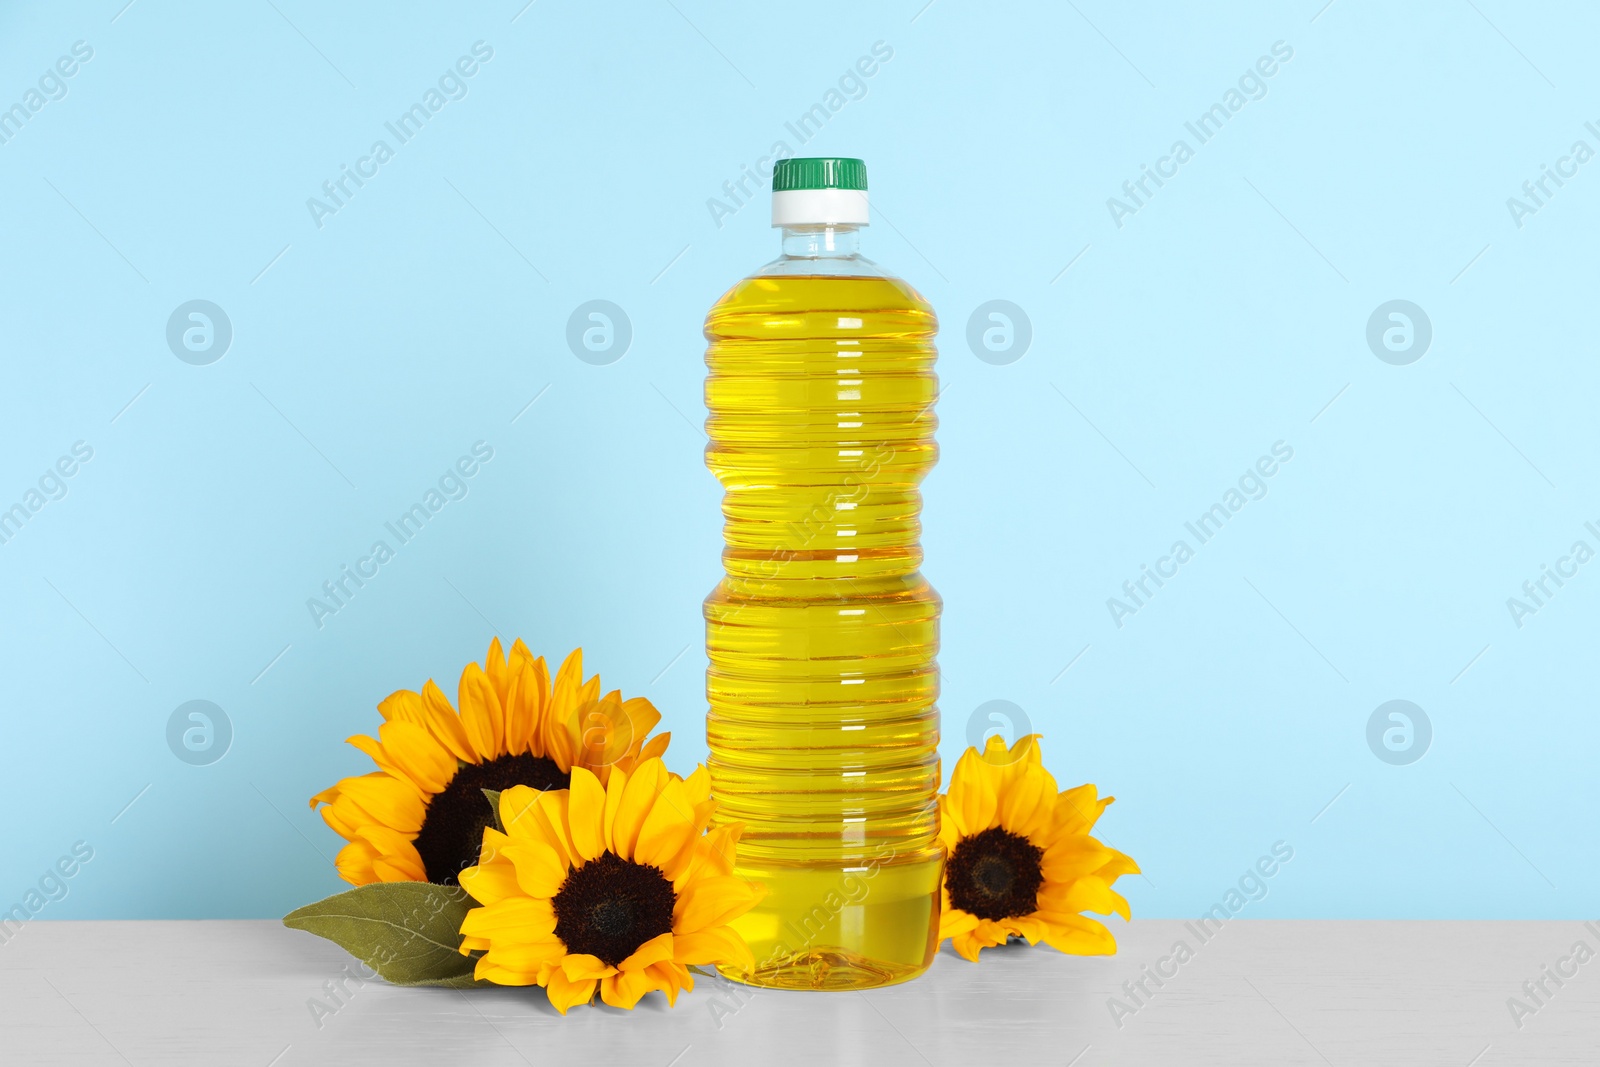 Photo of Bottle of cooking oil and sunflowers on white table